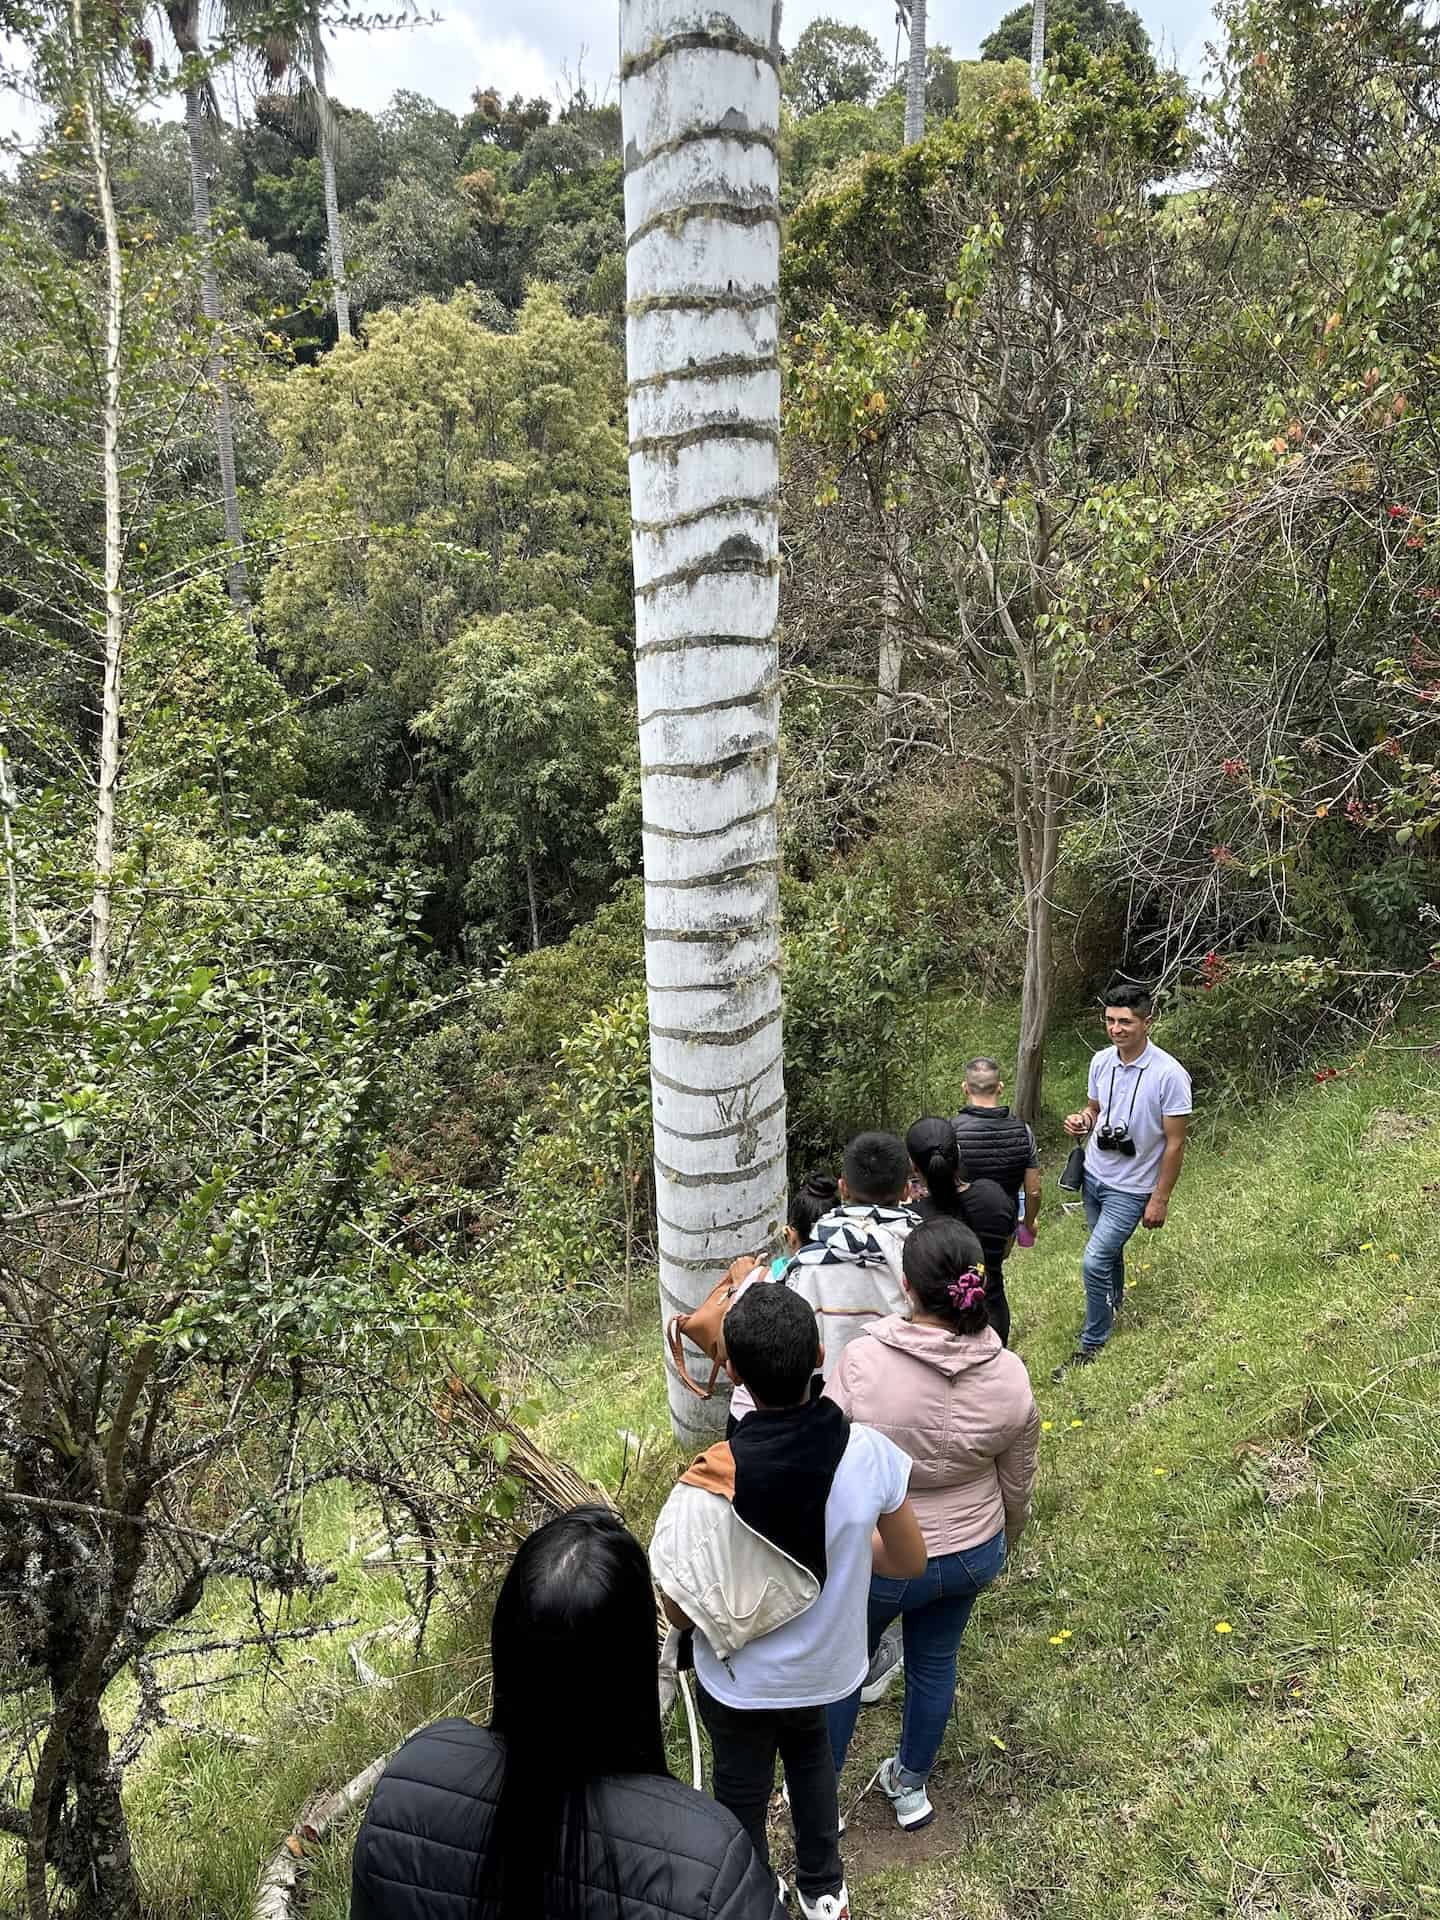 The guide explaining properties of the wax palms at Ecohotel Valle de la Samaria